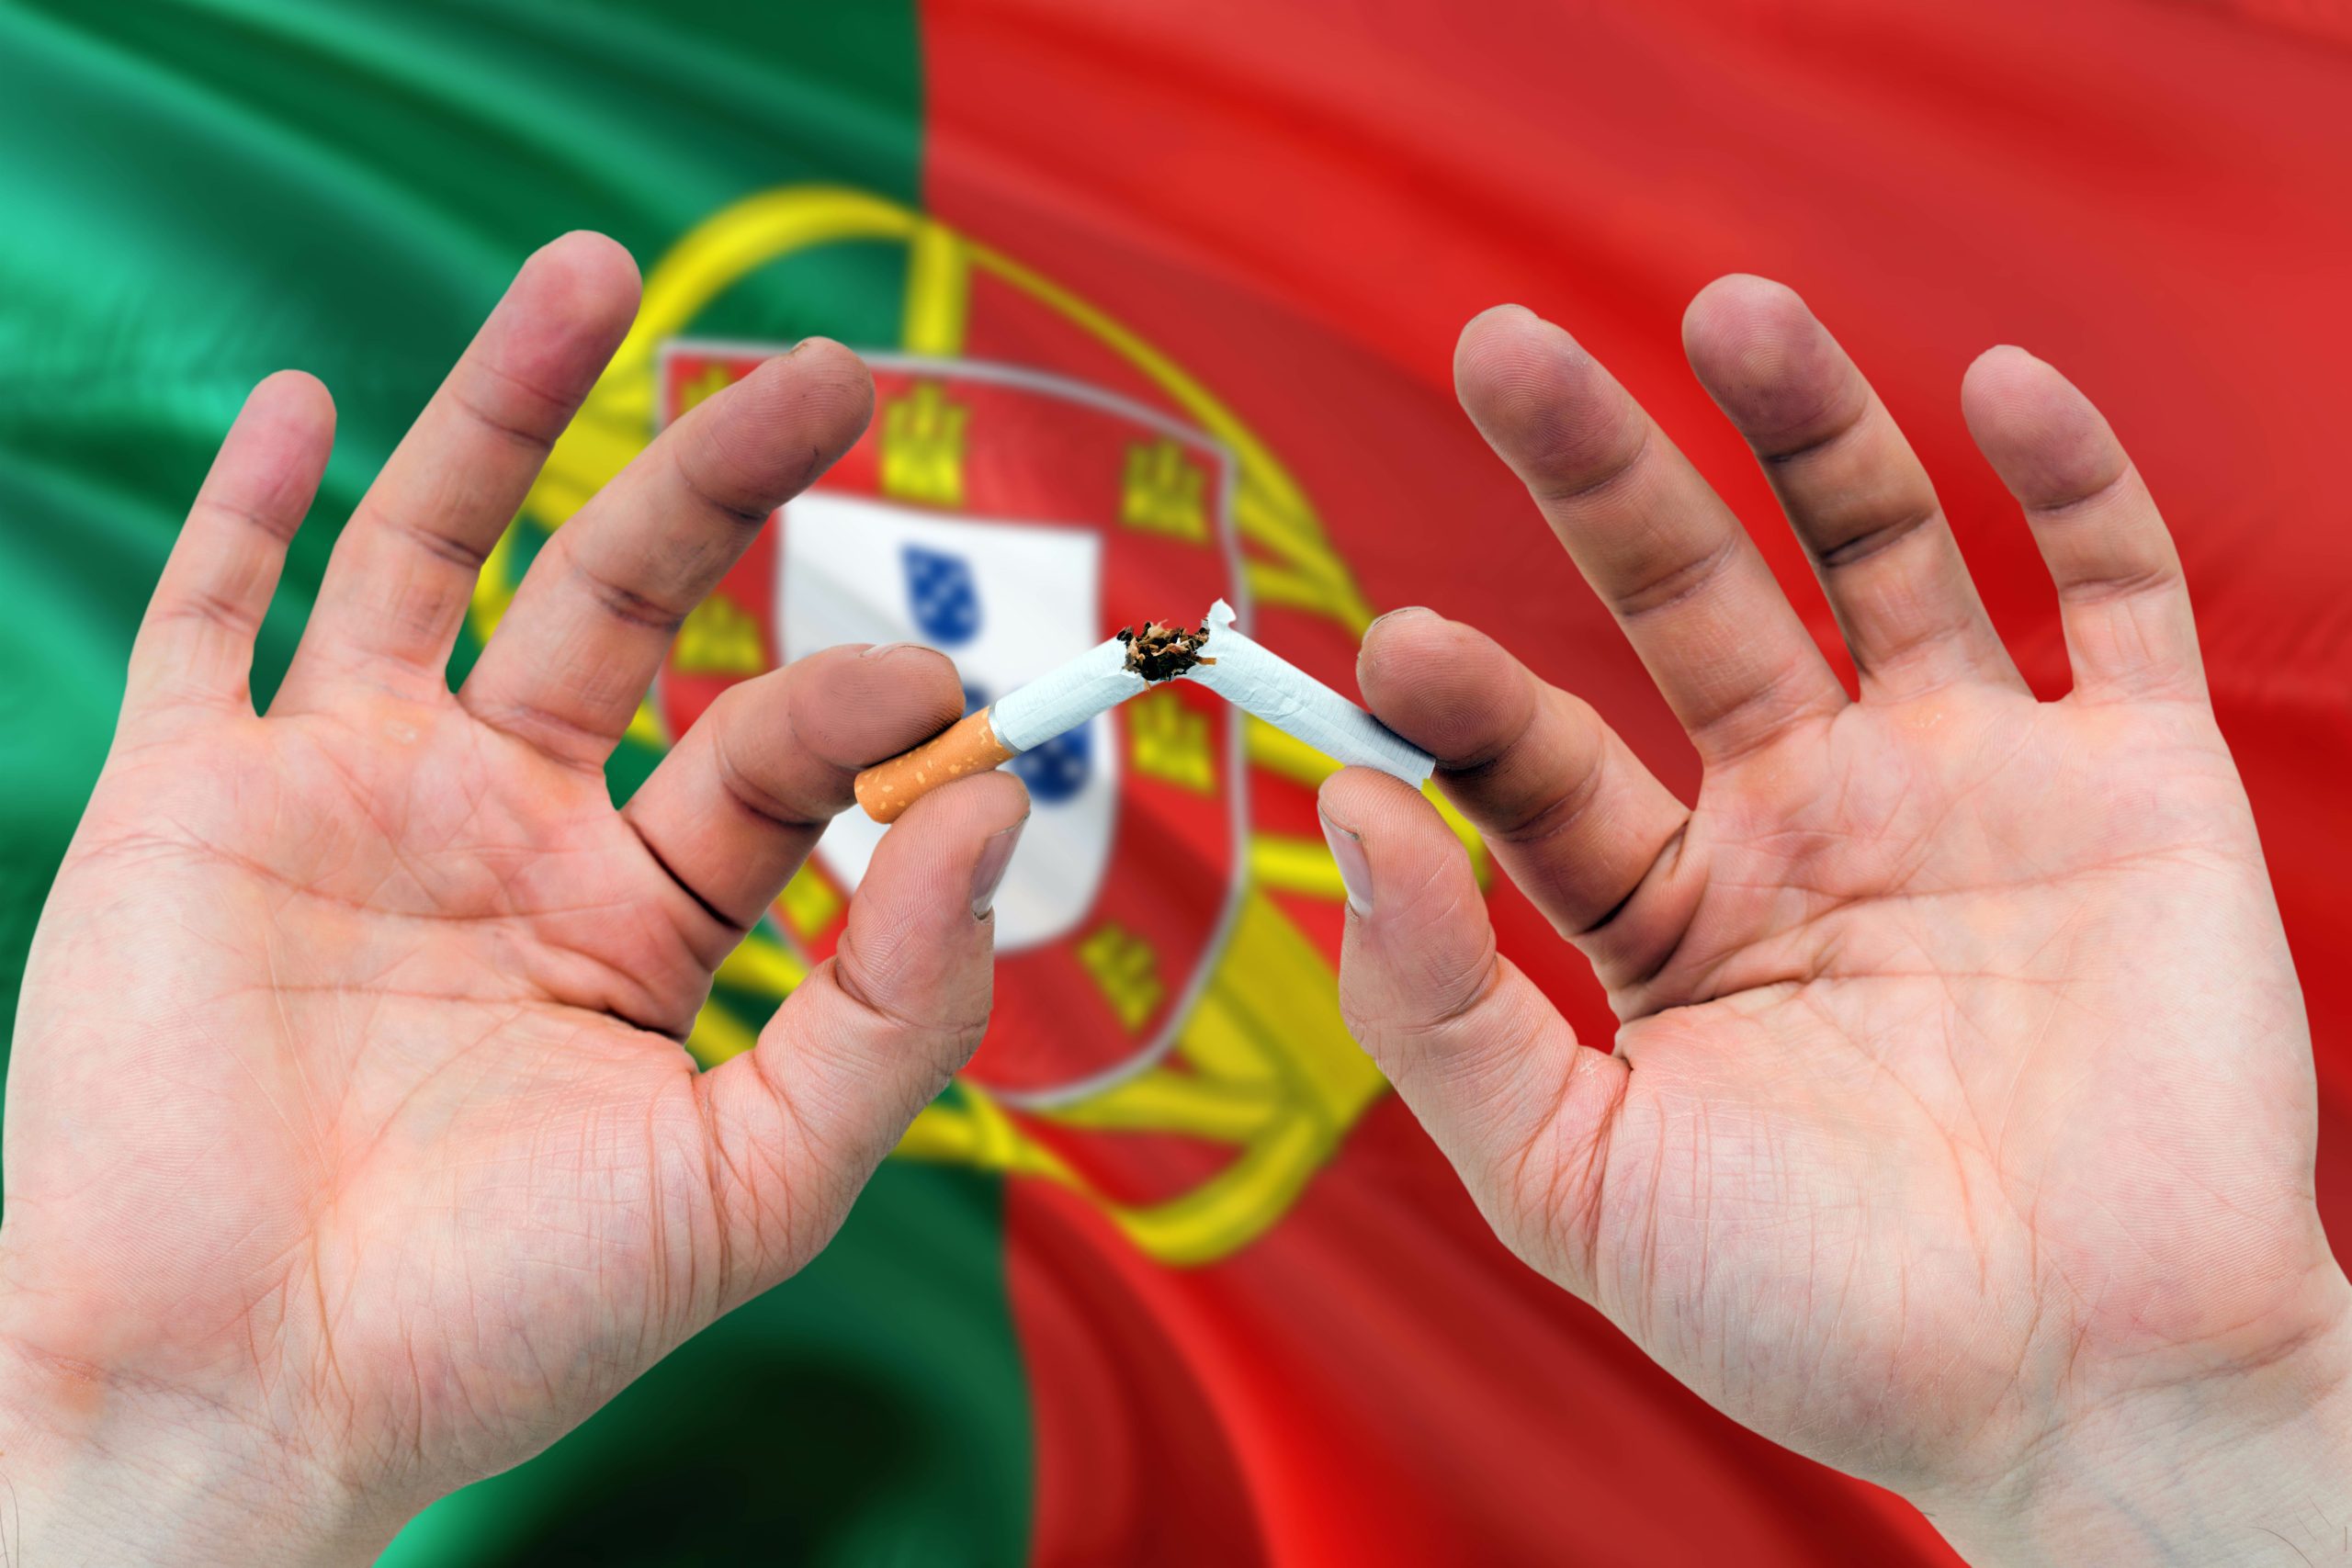  Portugal Mulls New Rules for Tobacco